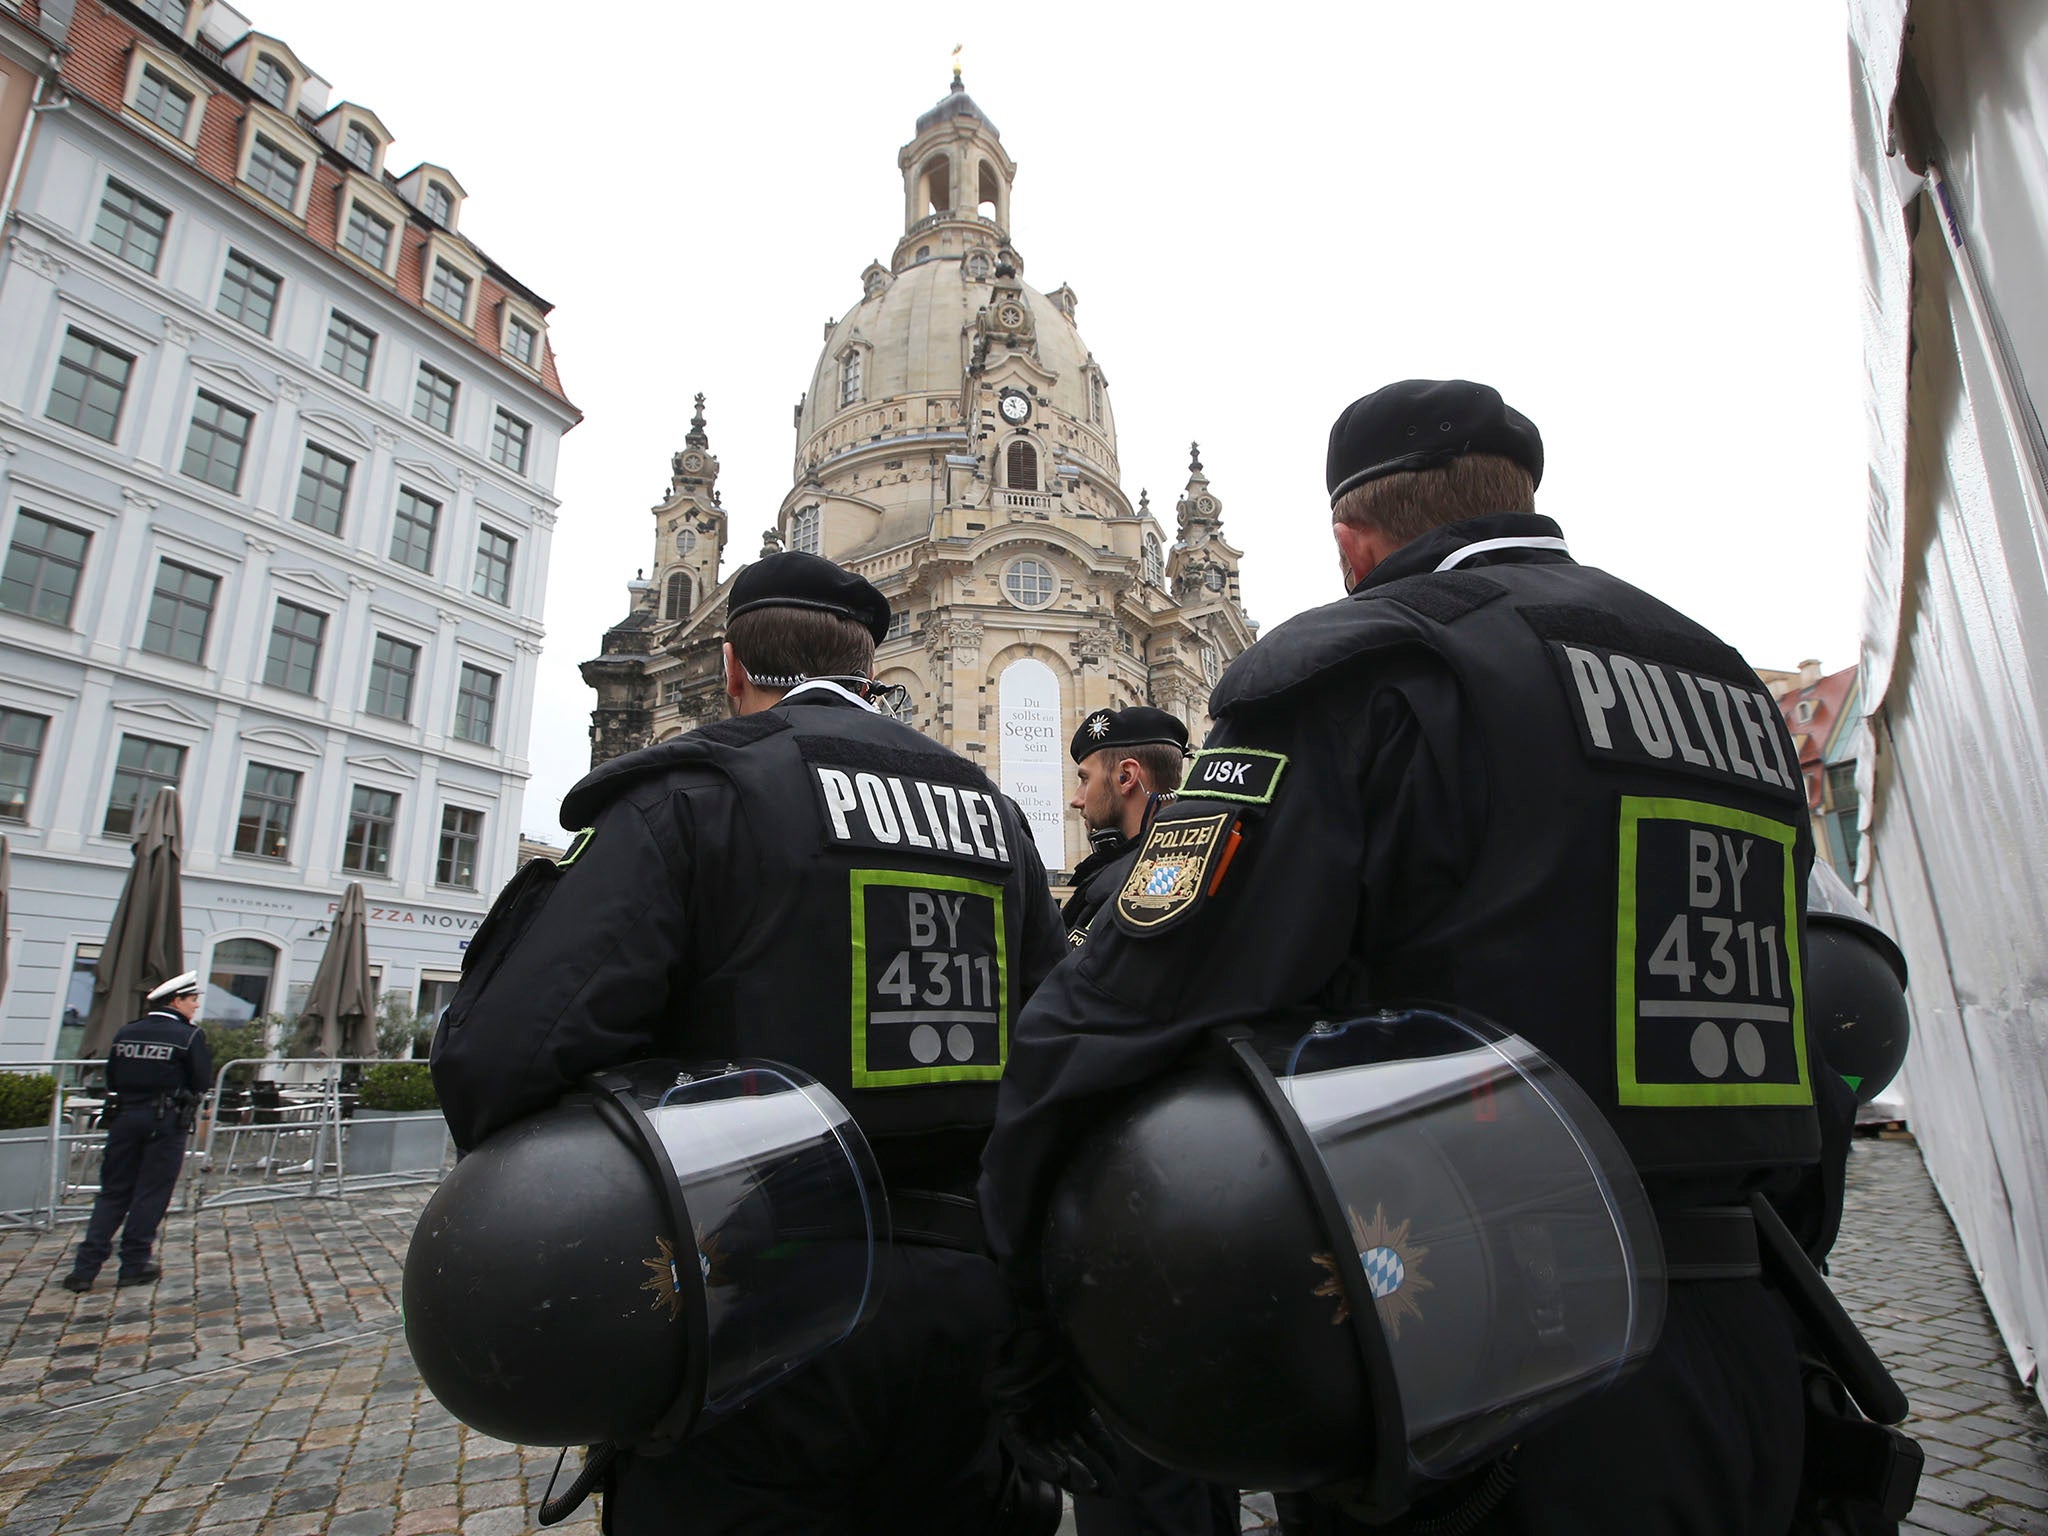 German police in front of the Frauenkirche cathedral in Dresden, where the incident took place